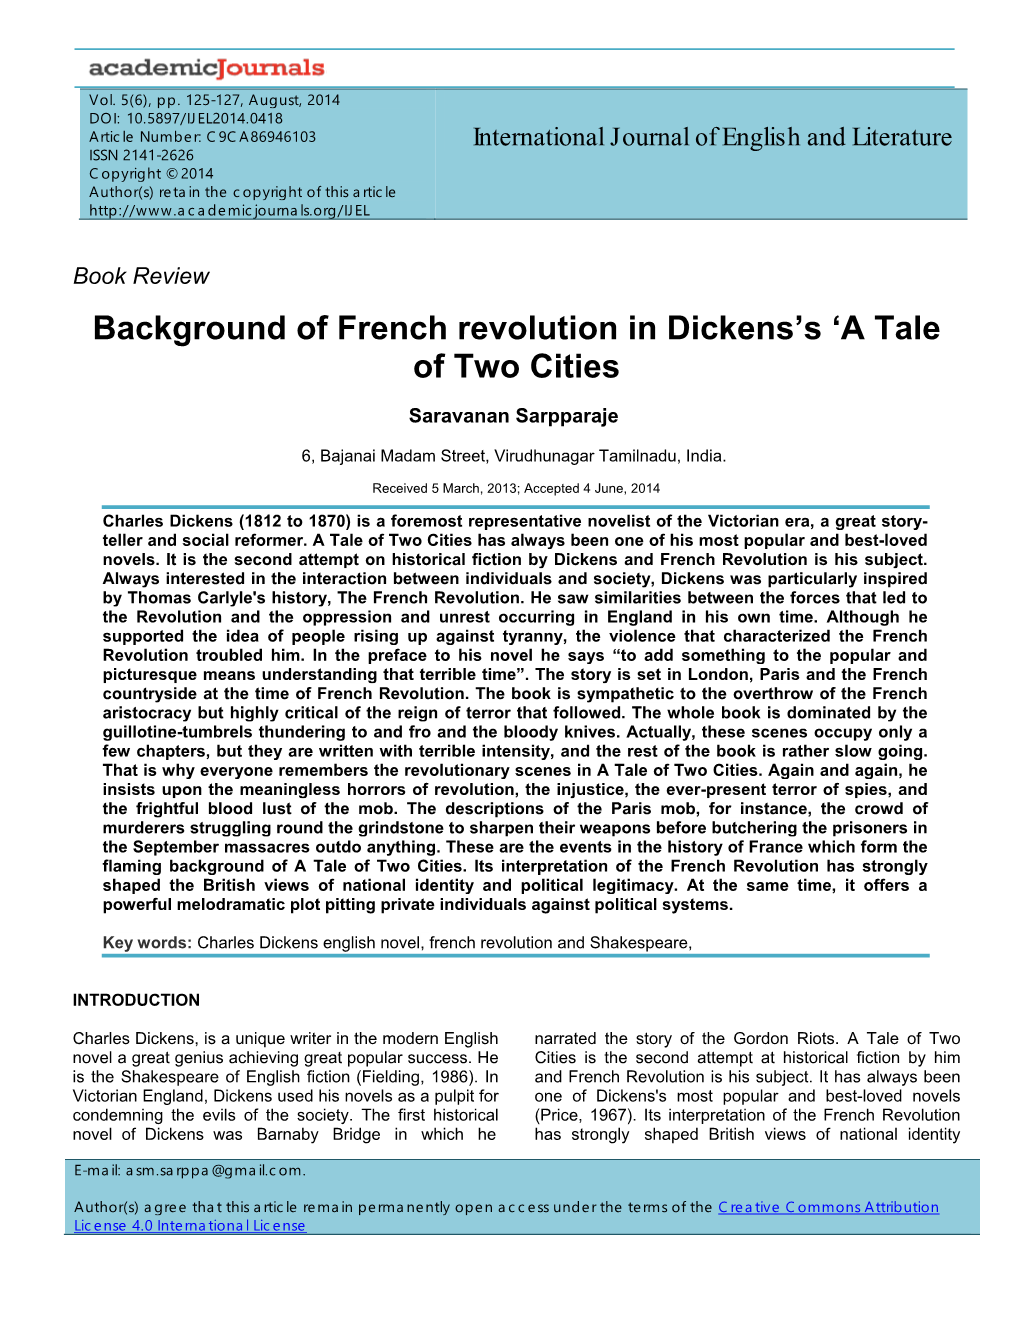 Background of French Revolution in Dickens's 'A Tale of Two Cities